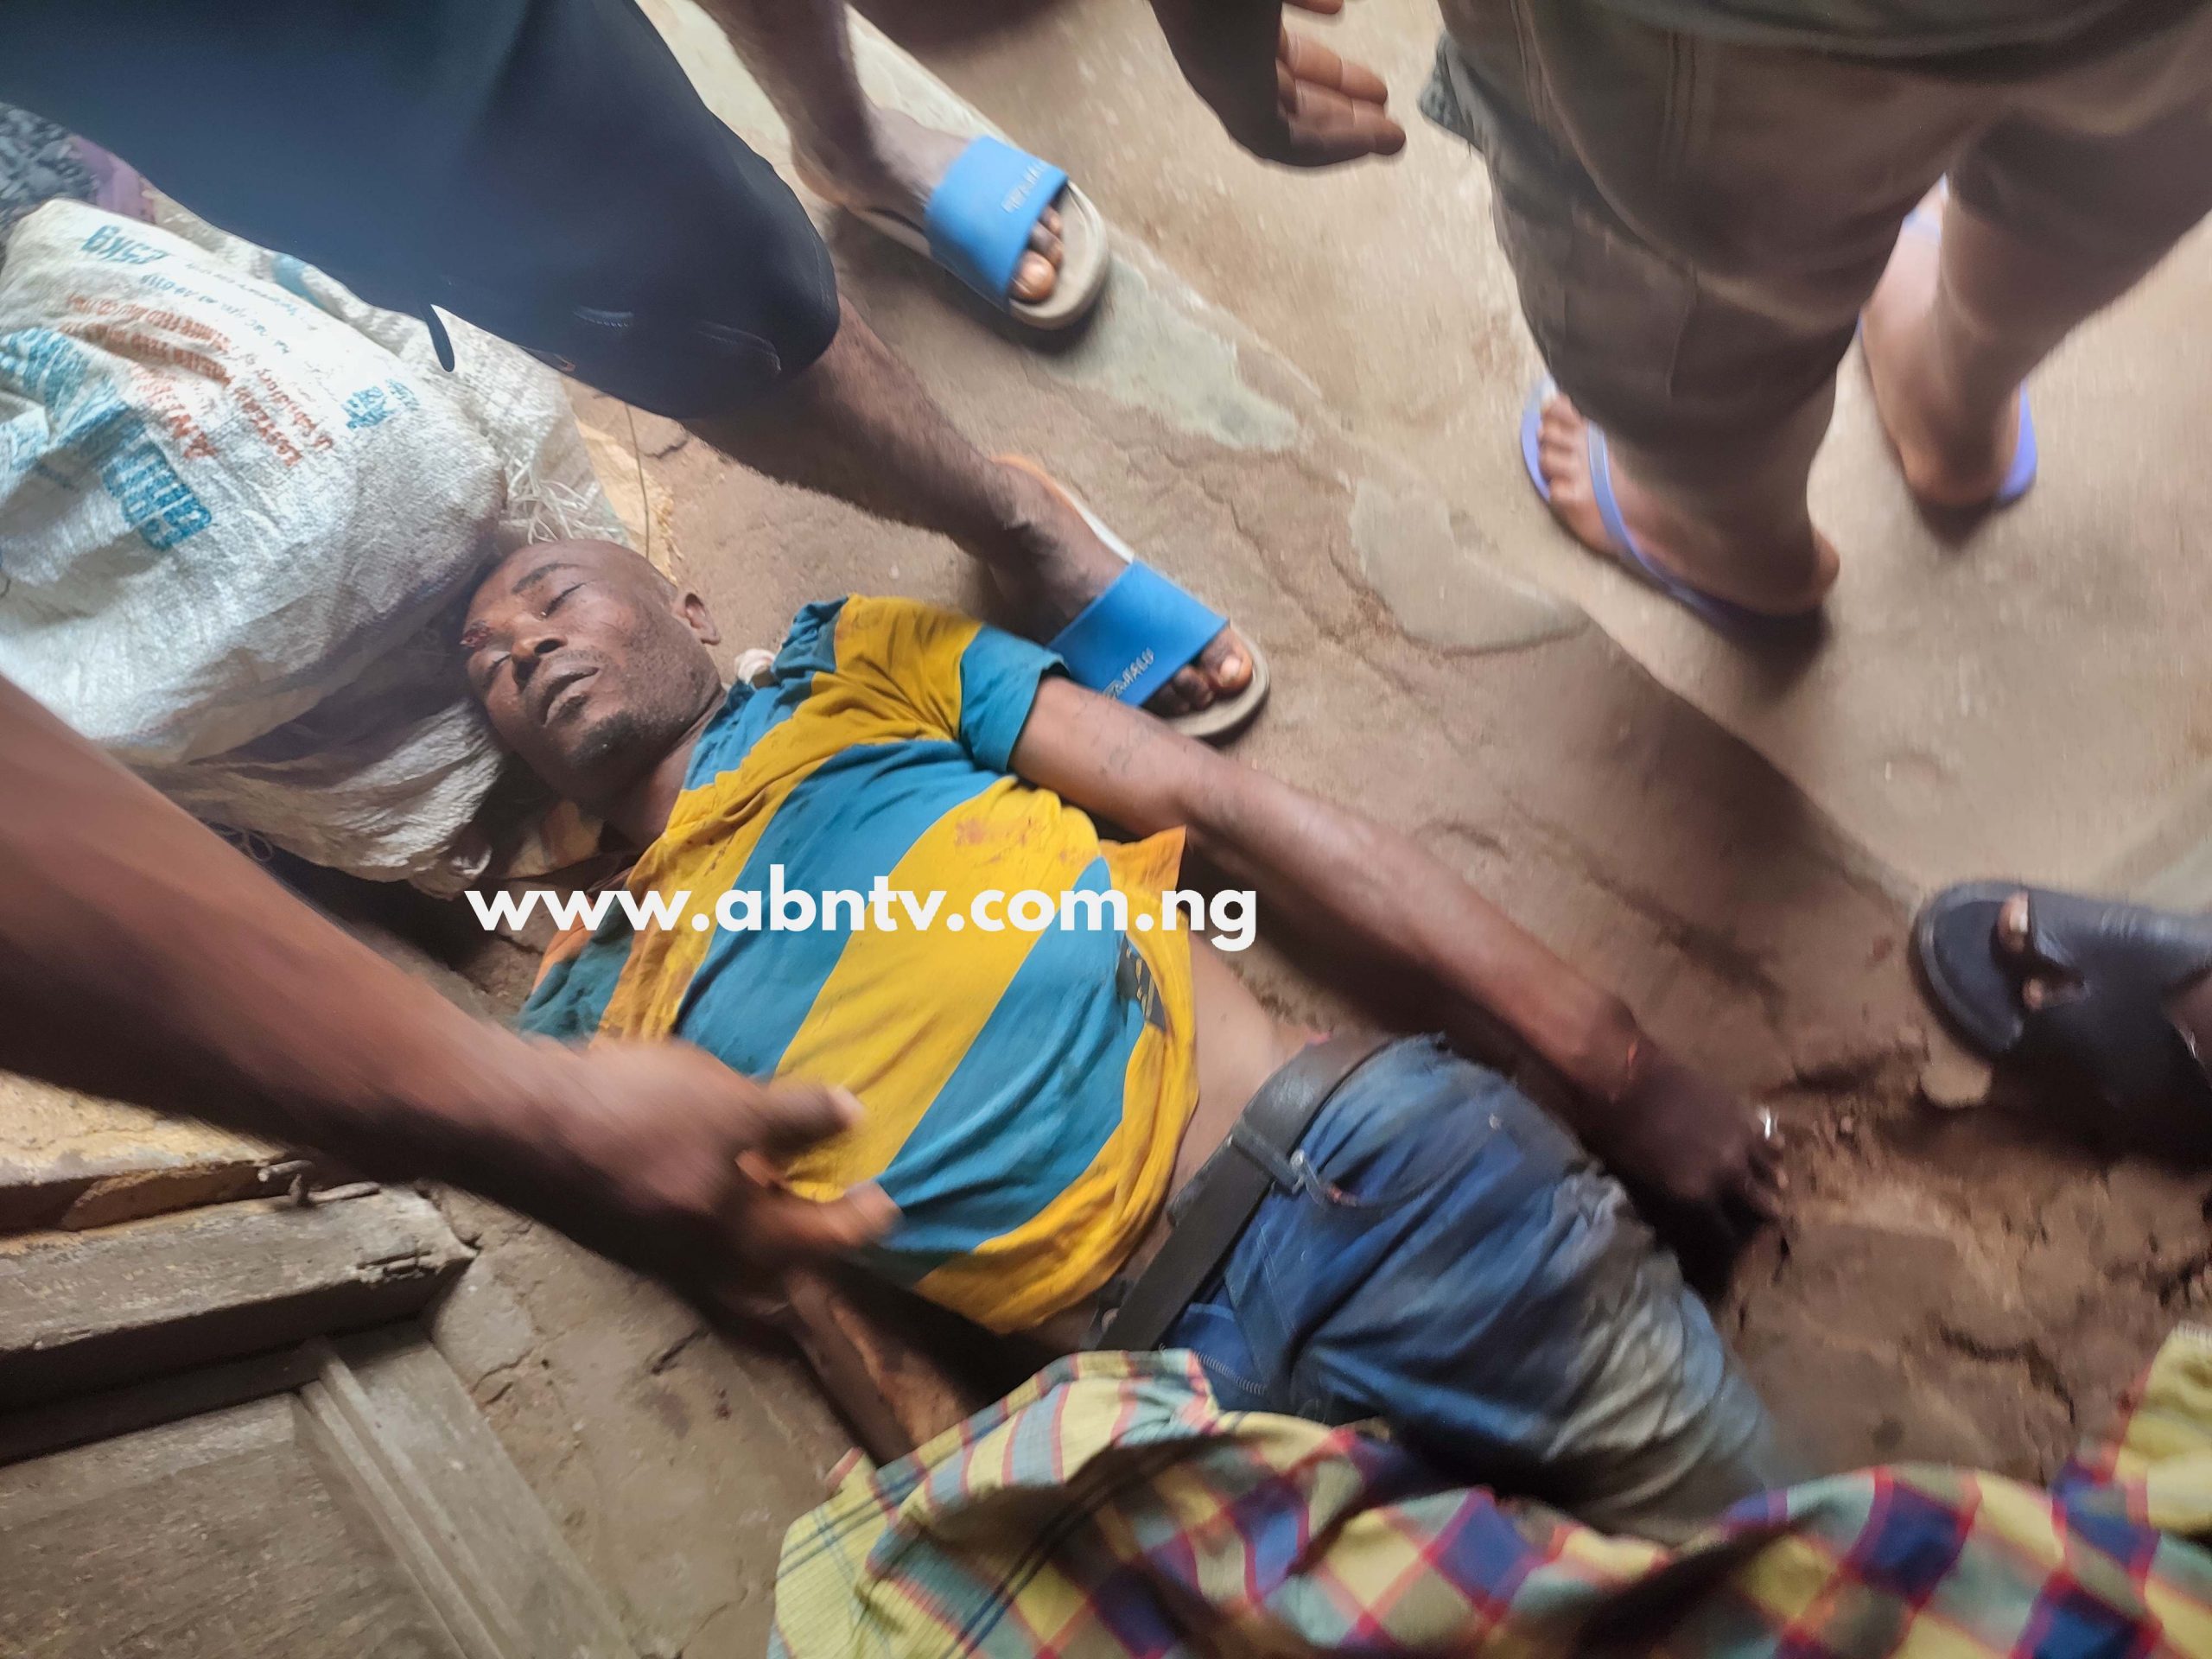 Gunmen On Rampage In Abia Community, Kill One Indigene In Front Of His House, Other (Graphic Photos)